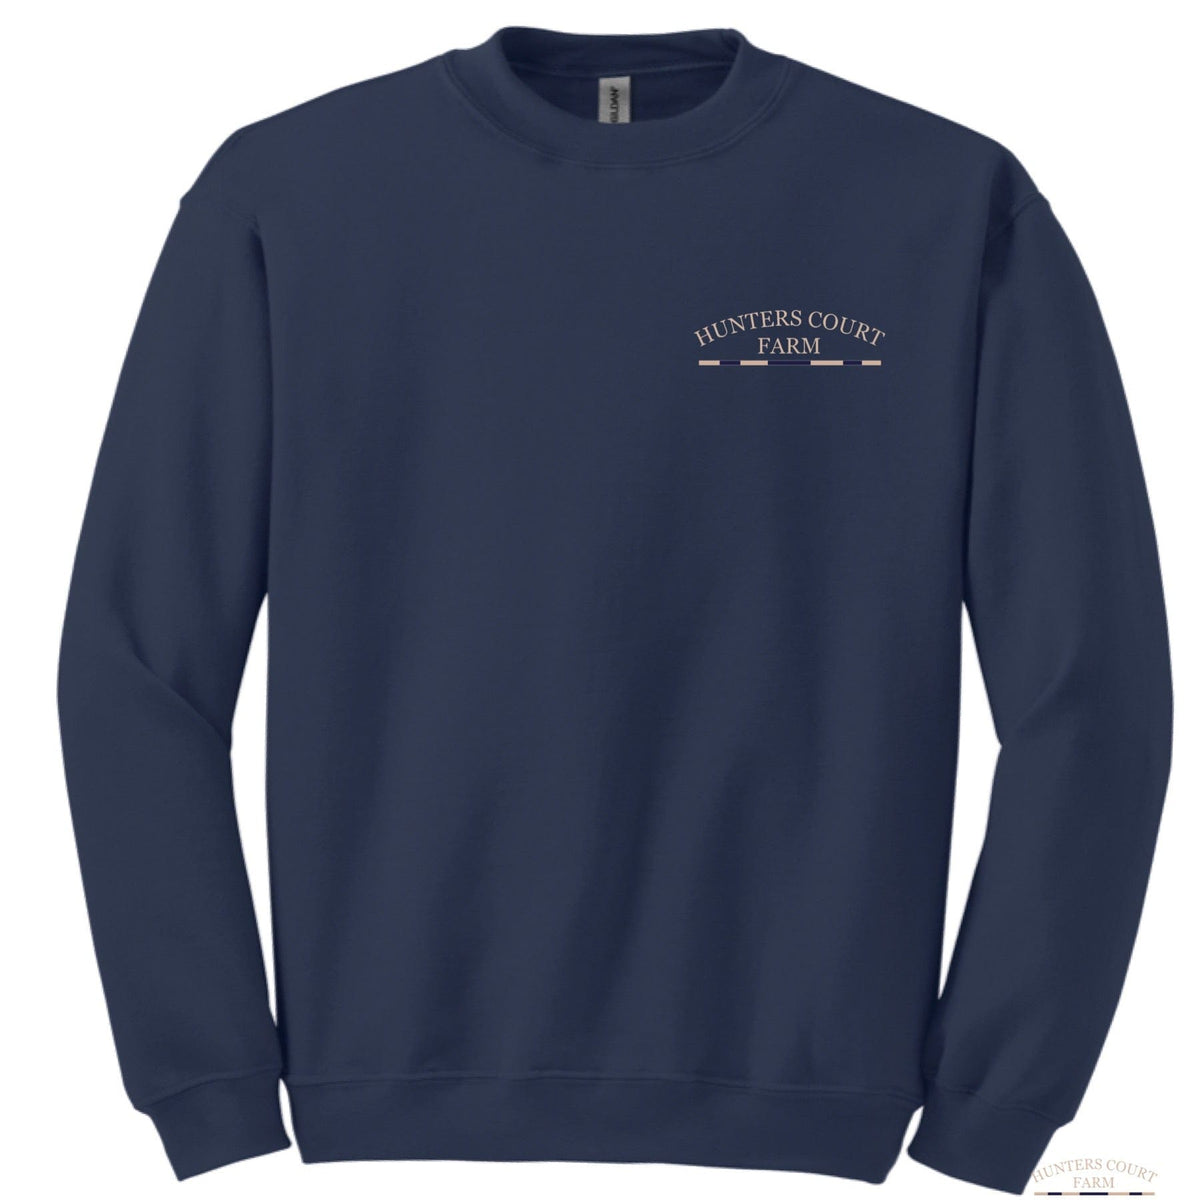 Equestrian Team Apparel Hunters Court Farm Unisex Hoodies and Sweatshirts equestrian team apparel online tack store mobile tack store custom farm apparel custom show stable clothing equestrian lifestyle horse show clothing riding clothes horses equestrian tack store